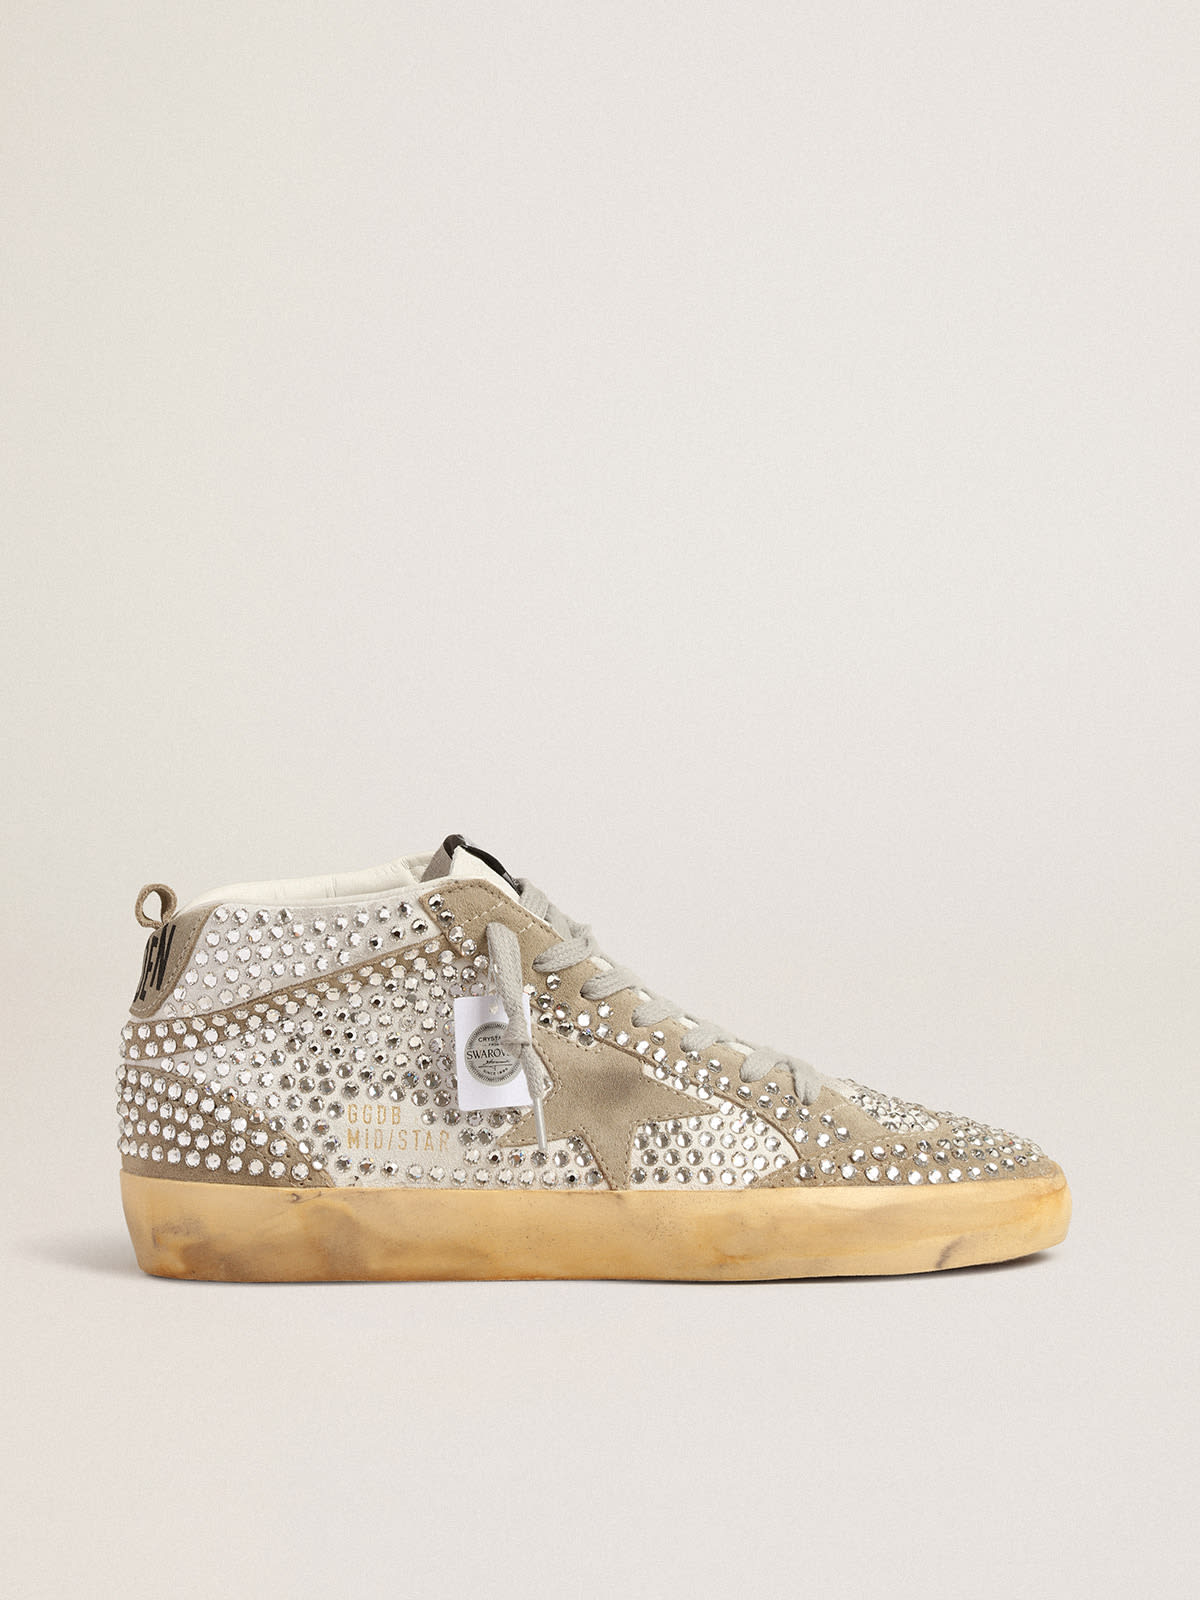 Golden Goose - Mid Star in white and dove-gray suede with Swarovski crystals in 